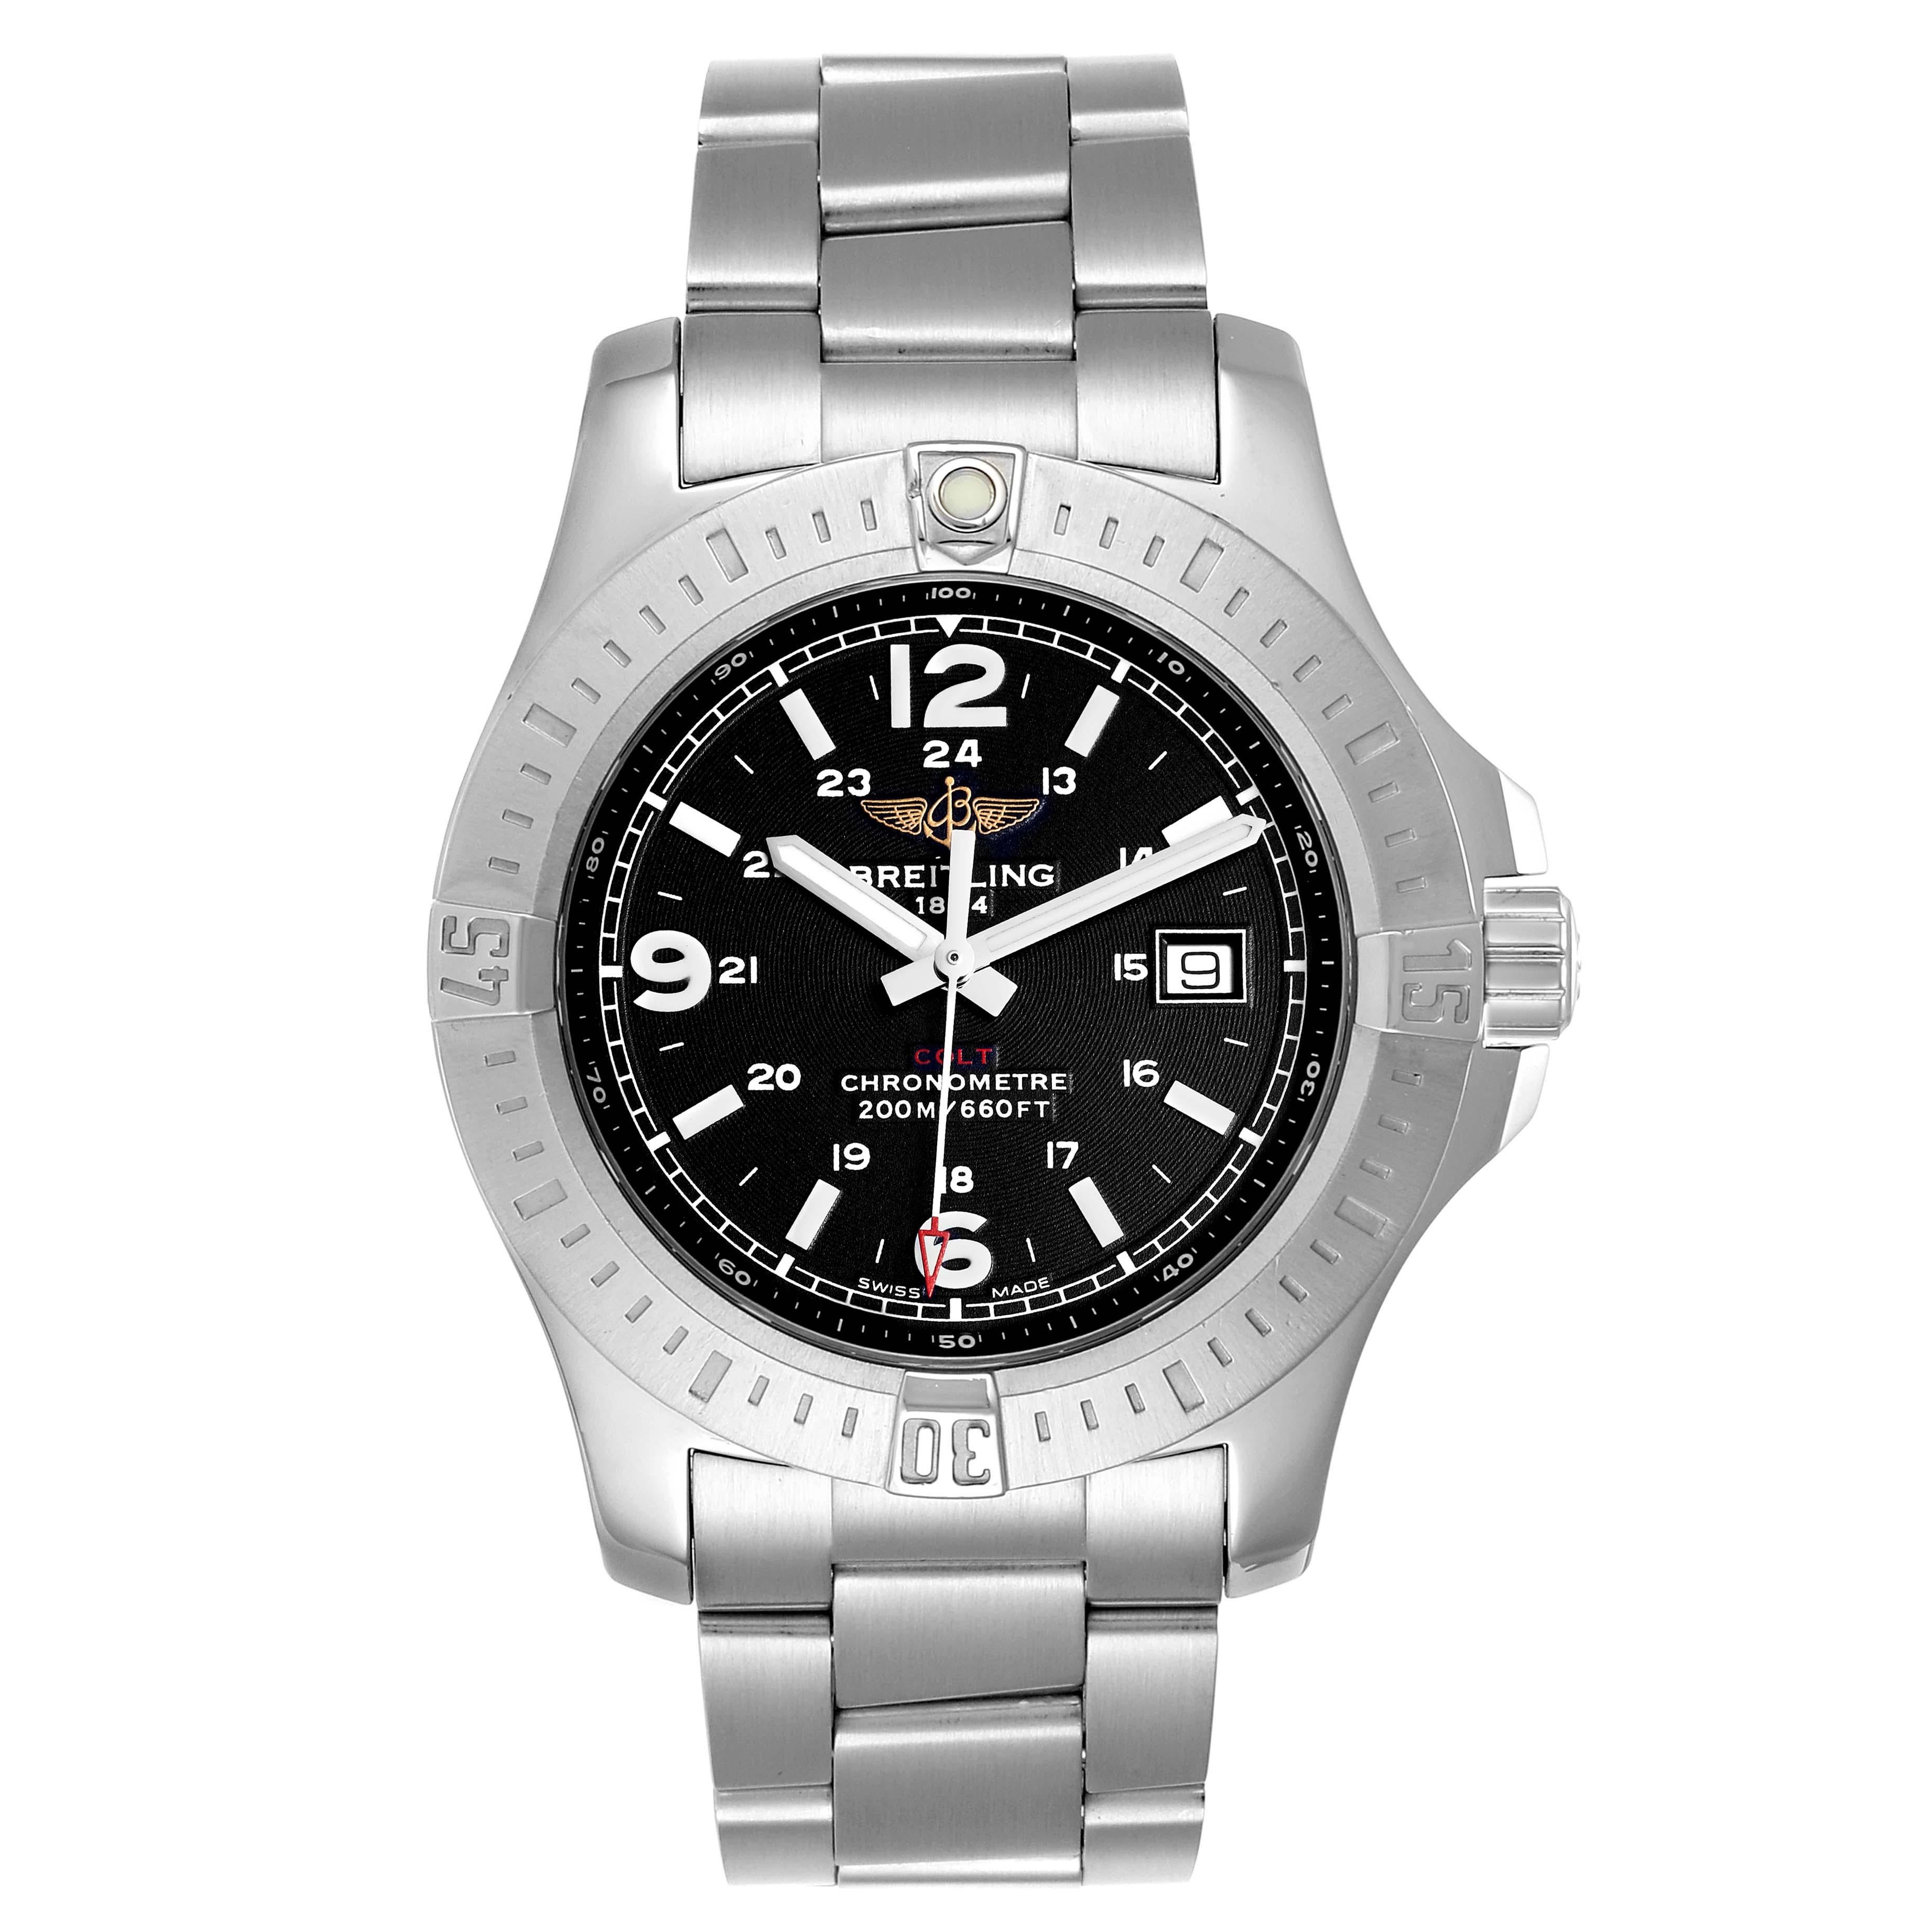 Breitling Colt Black Dial Stainless Steel Mens Watch A74388. Automatic self-winding movement. Stainless steel case 44 mm in diameter. Breitling logo on a crown. Stainless steel unidirectional rotating bezel. 0-60 elapsed-time. Four 15 minute